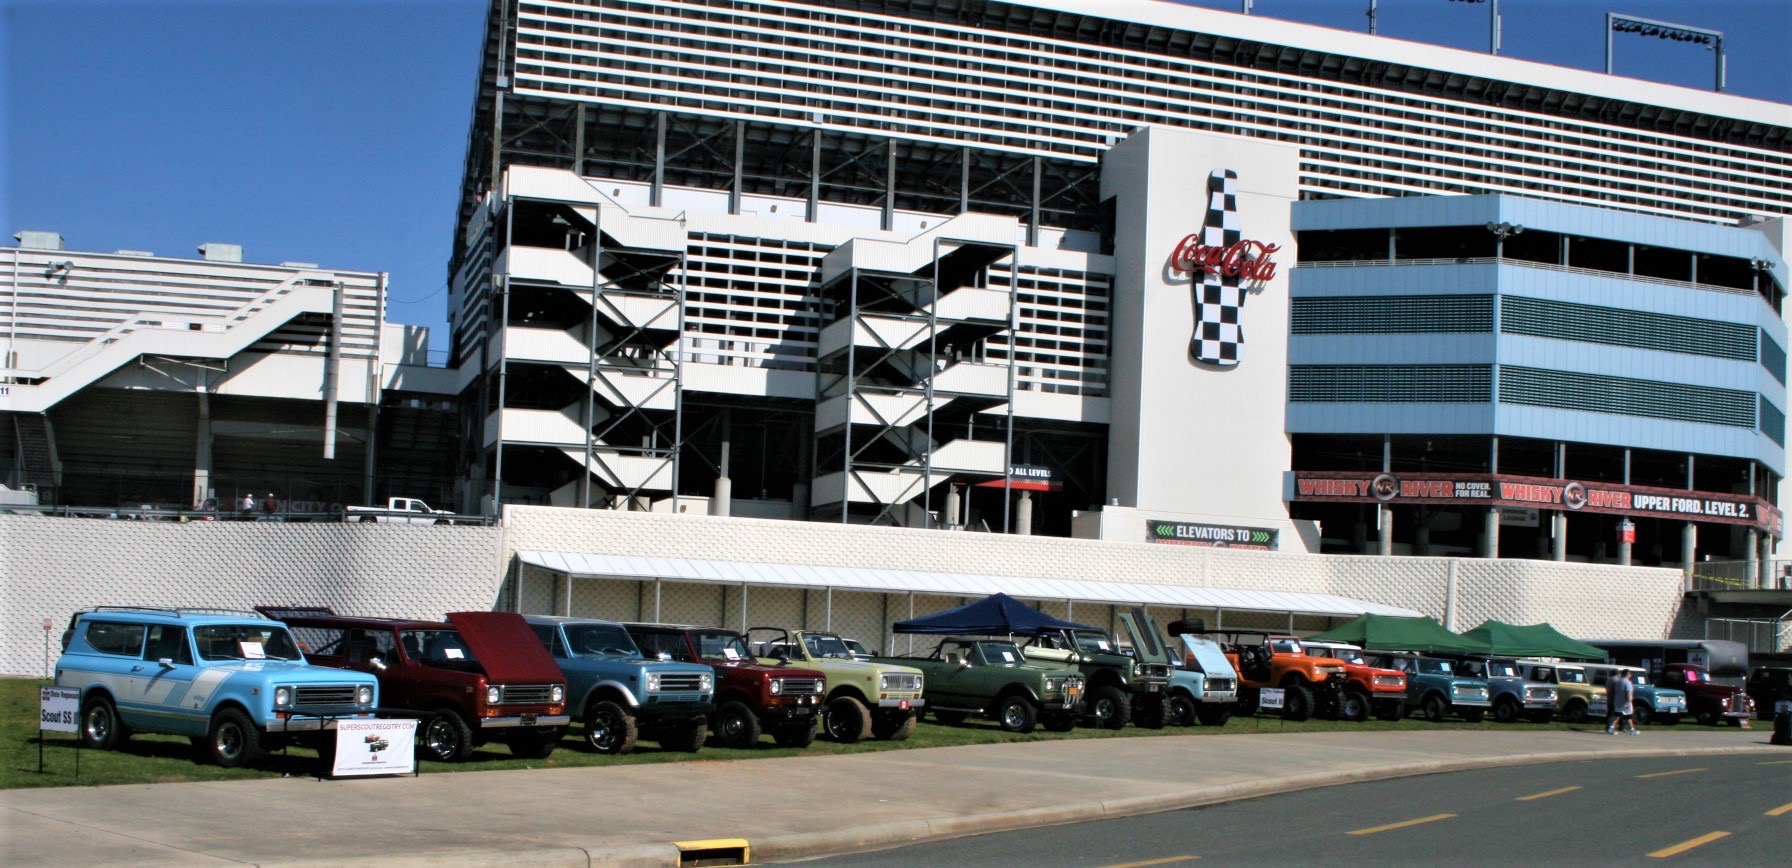 Charlotte AutoFair, This Hornets Nest stirs up a top-rate collector car weekend, ClassicCars.com Journal